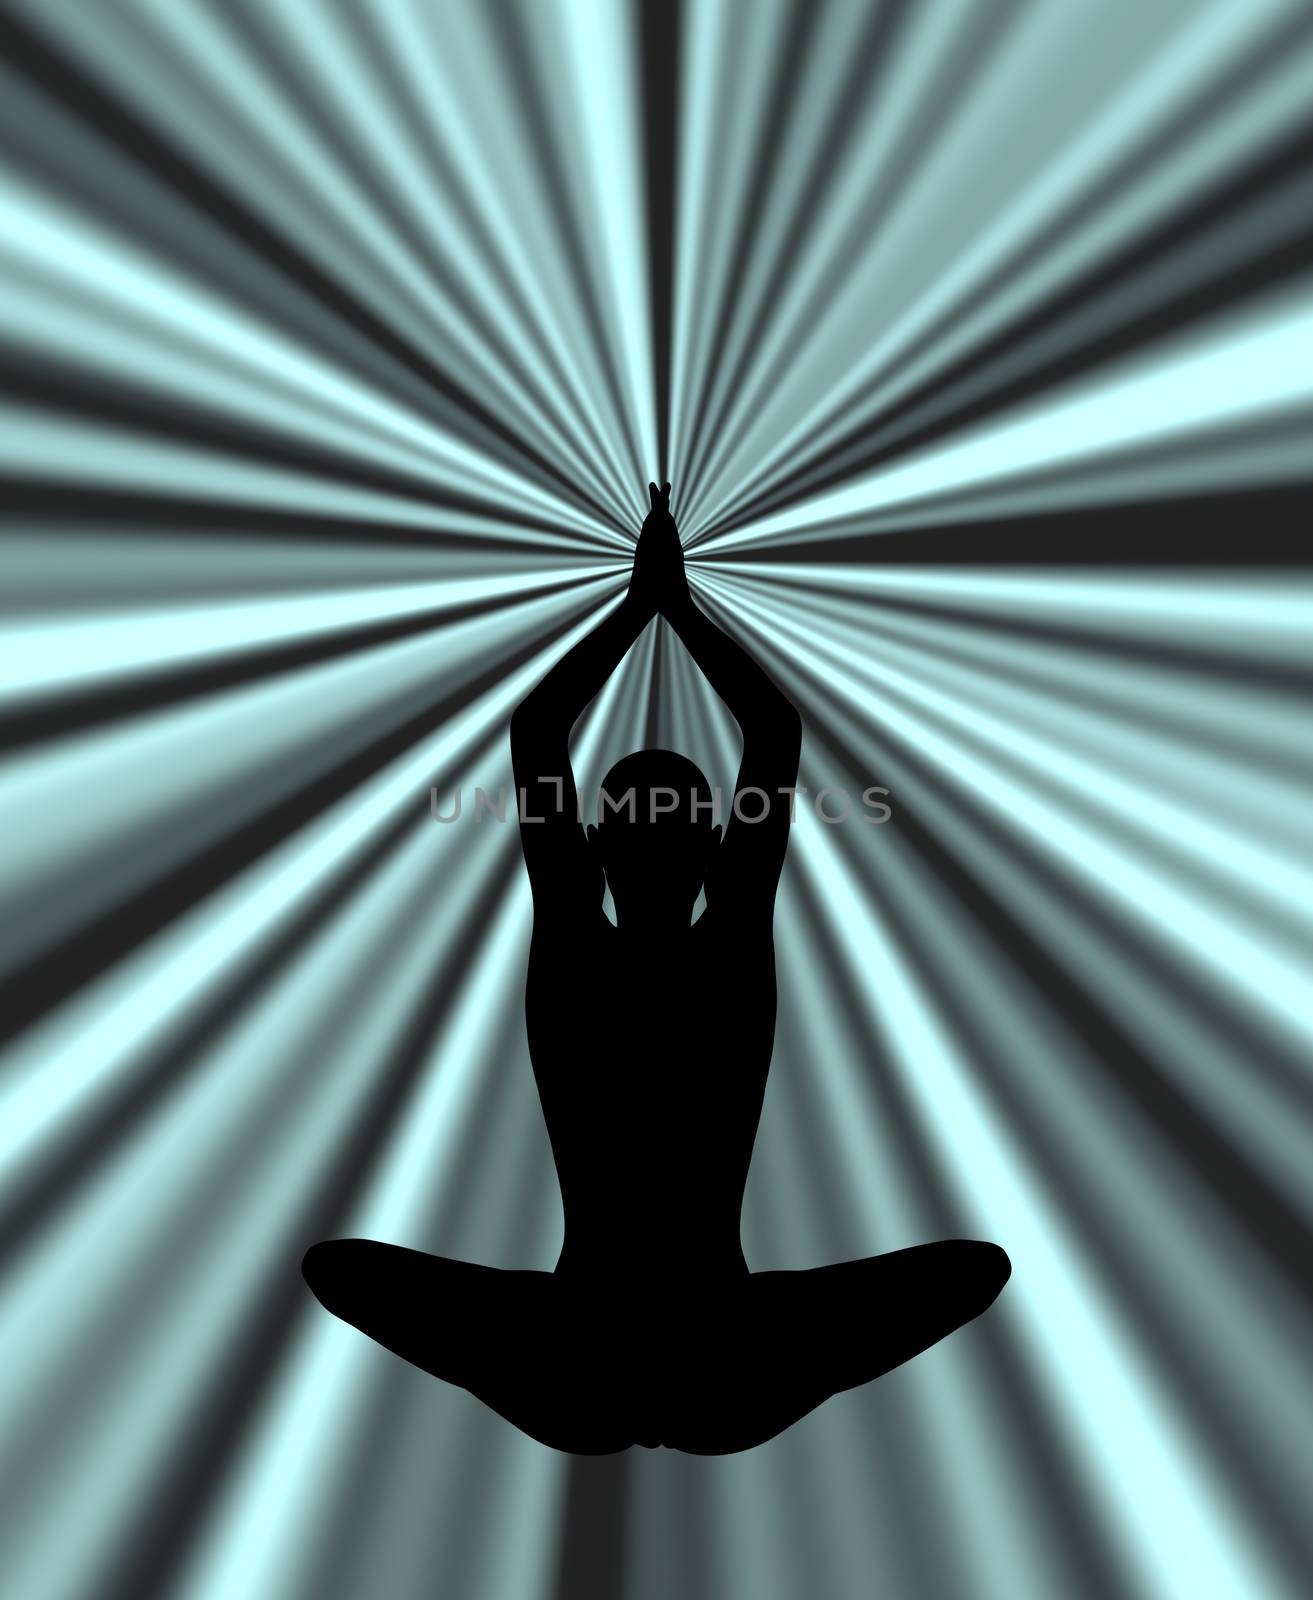 Silhouette practicing yoga in abstract background by ankarb